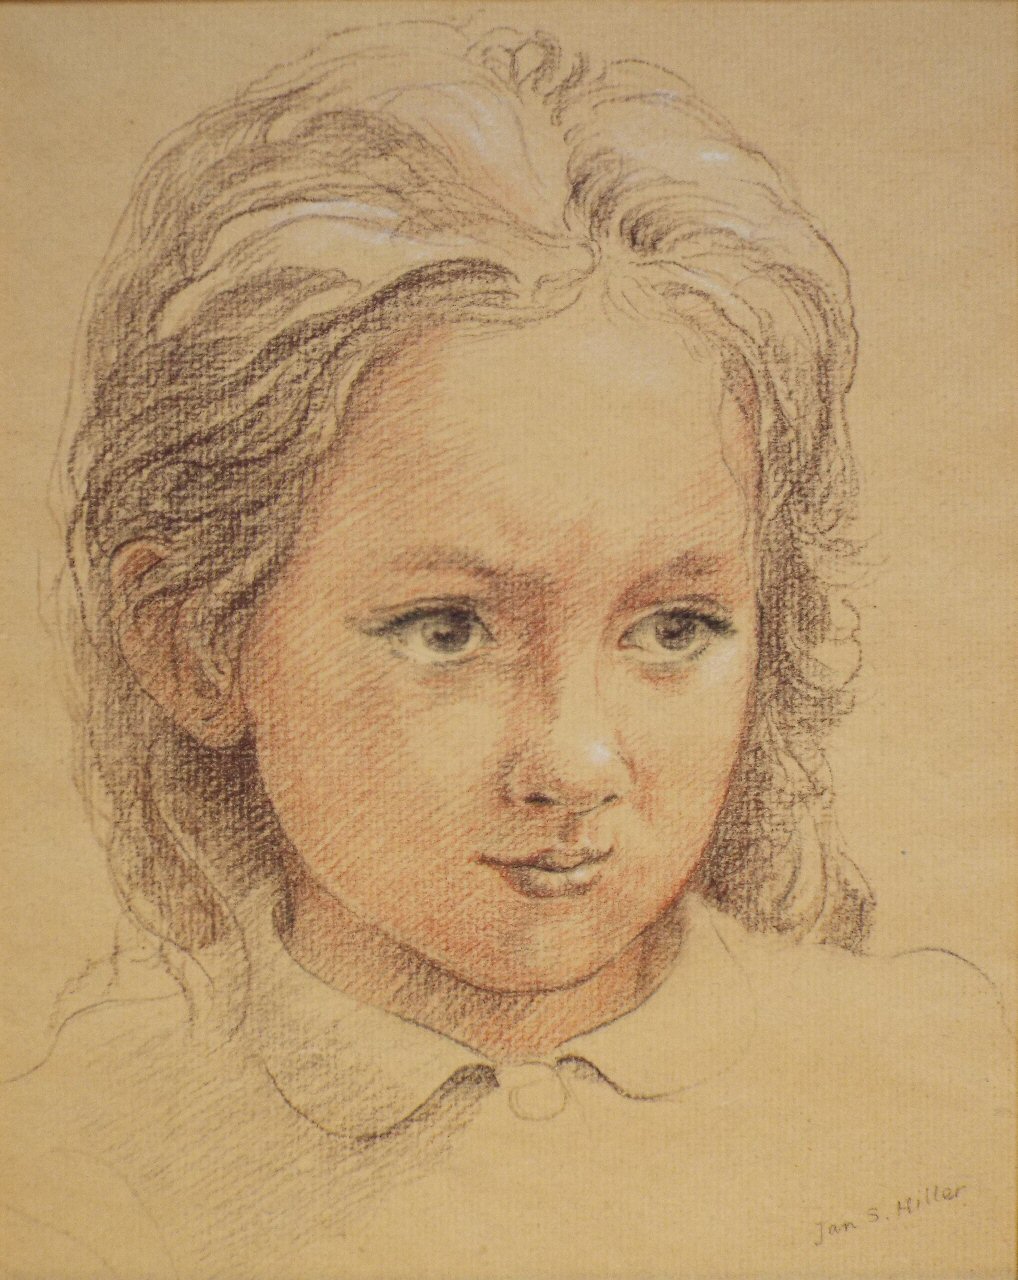 Pencil & Crayon - Portrait of a young girl